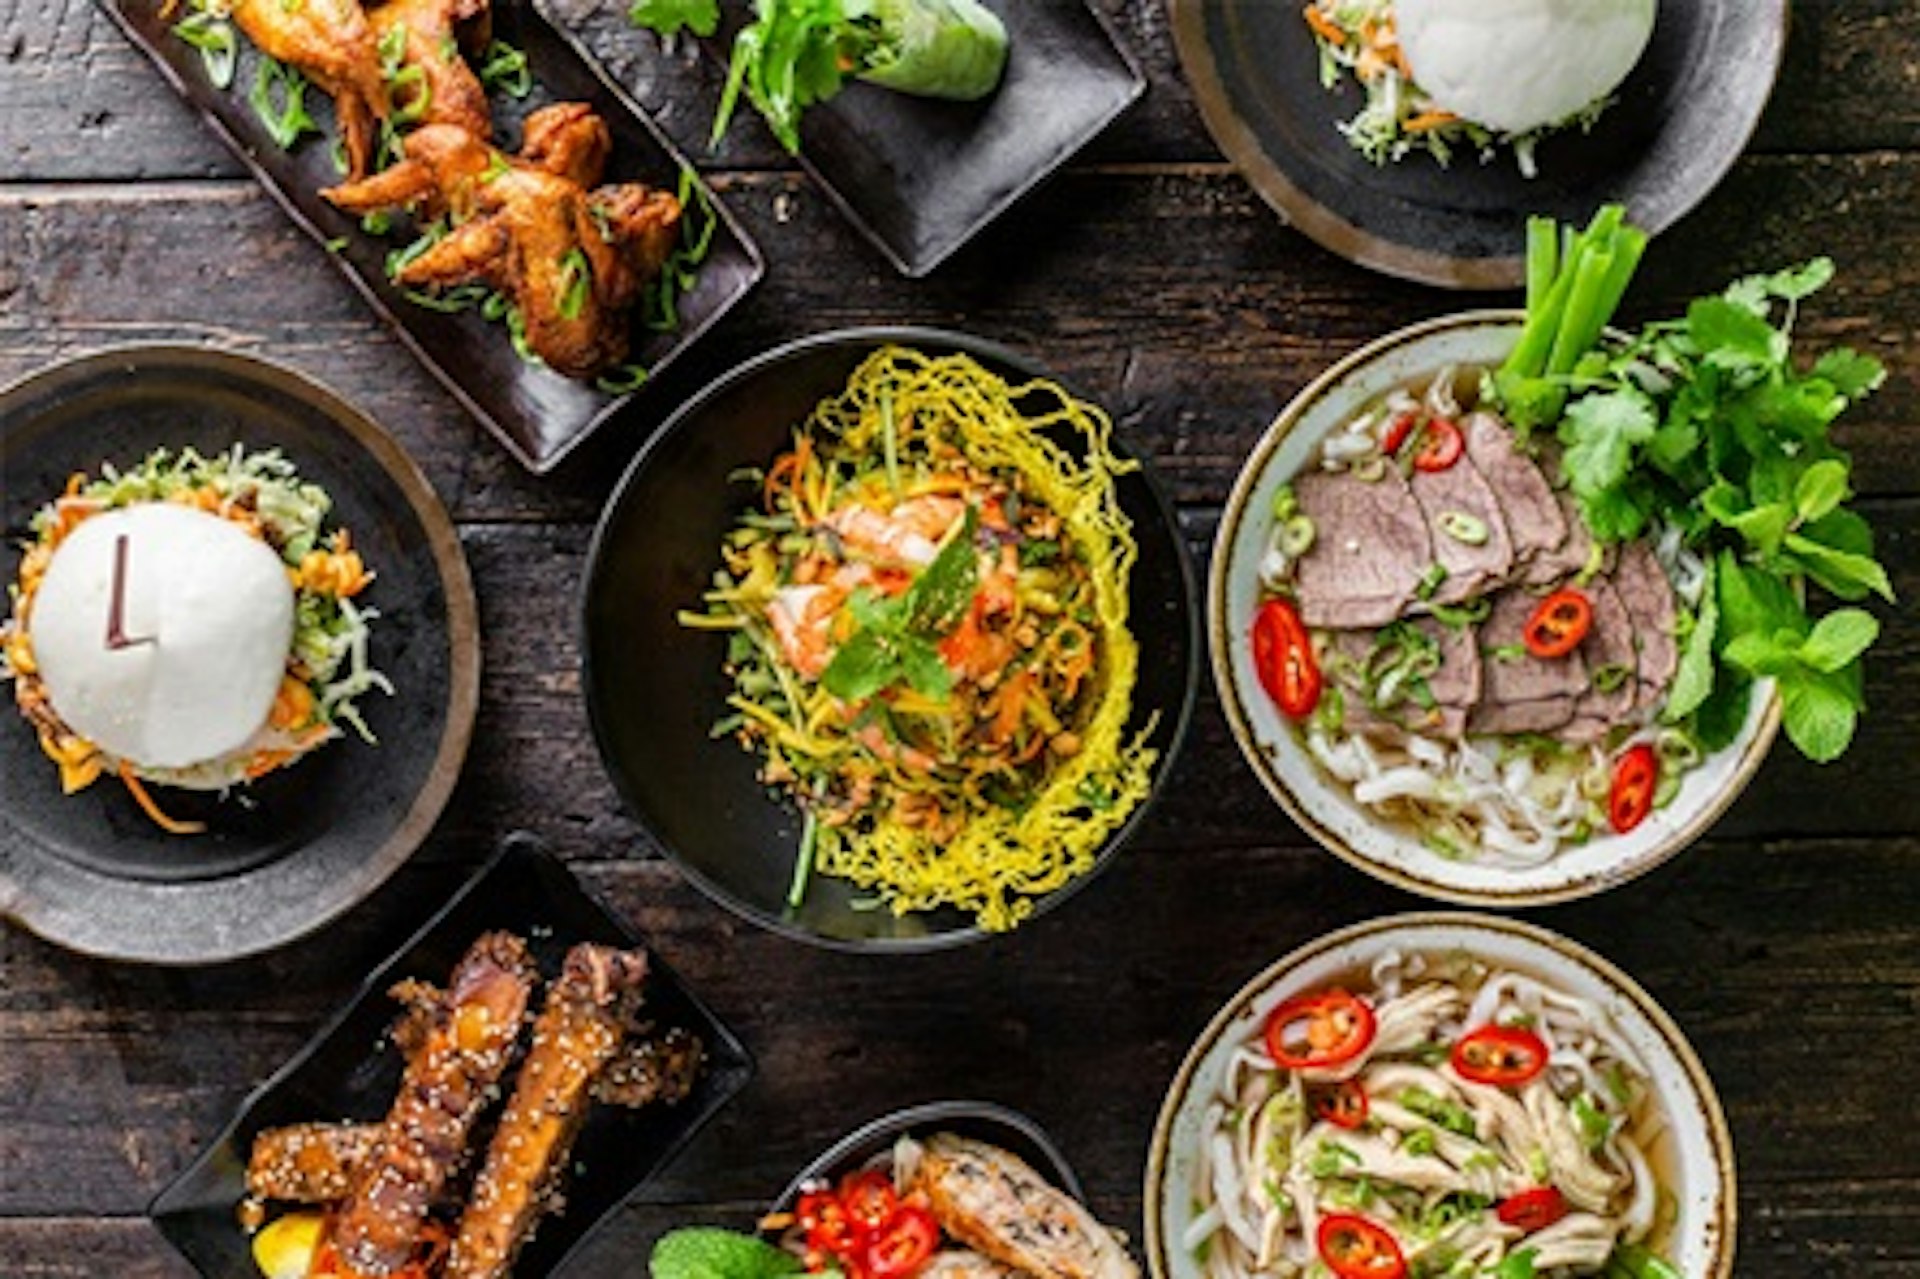 Four Course Vietnamese Street Food Dining Experience with Wine for Two at Pho & Bun 3